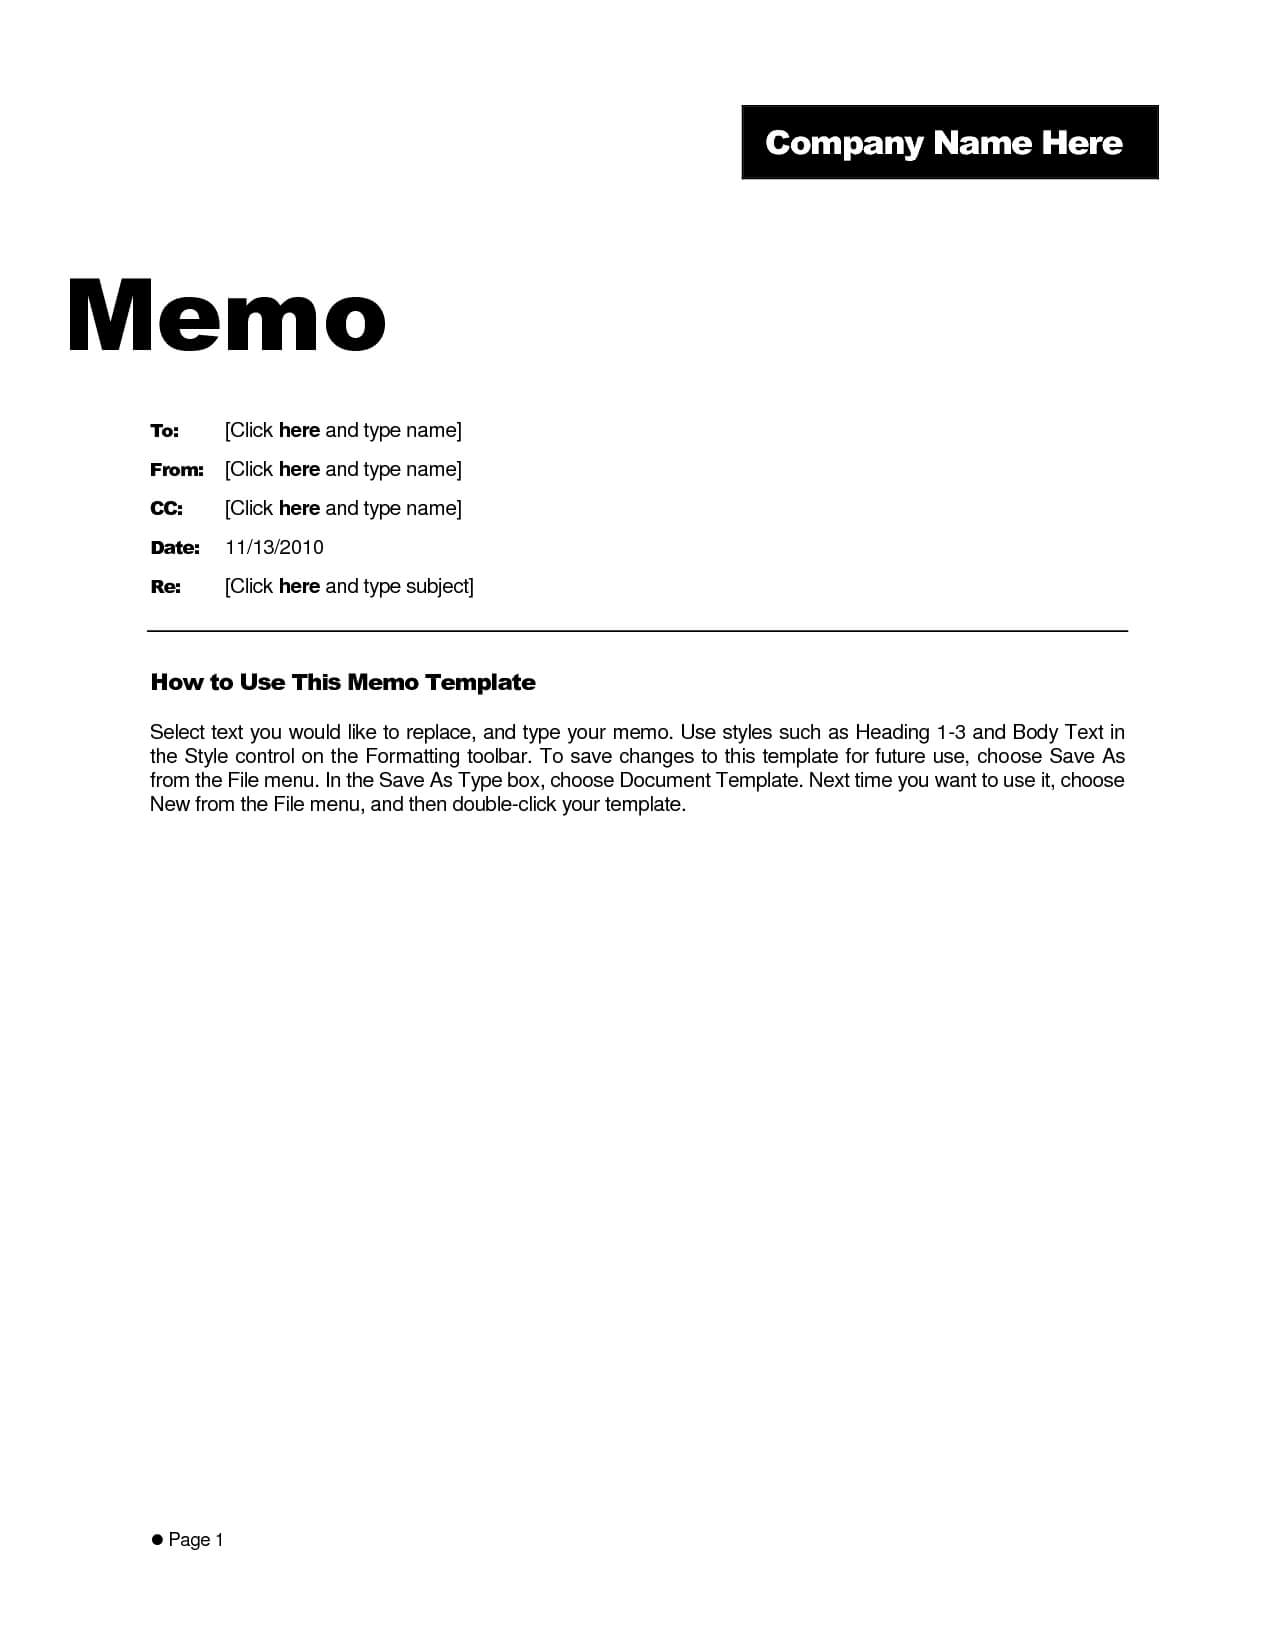 Memo Template Word 2010 – Cumed Within Banner Template Word 2010